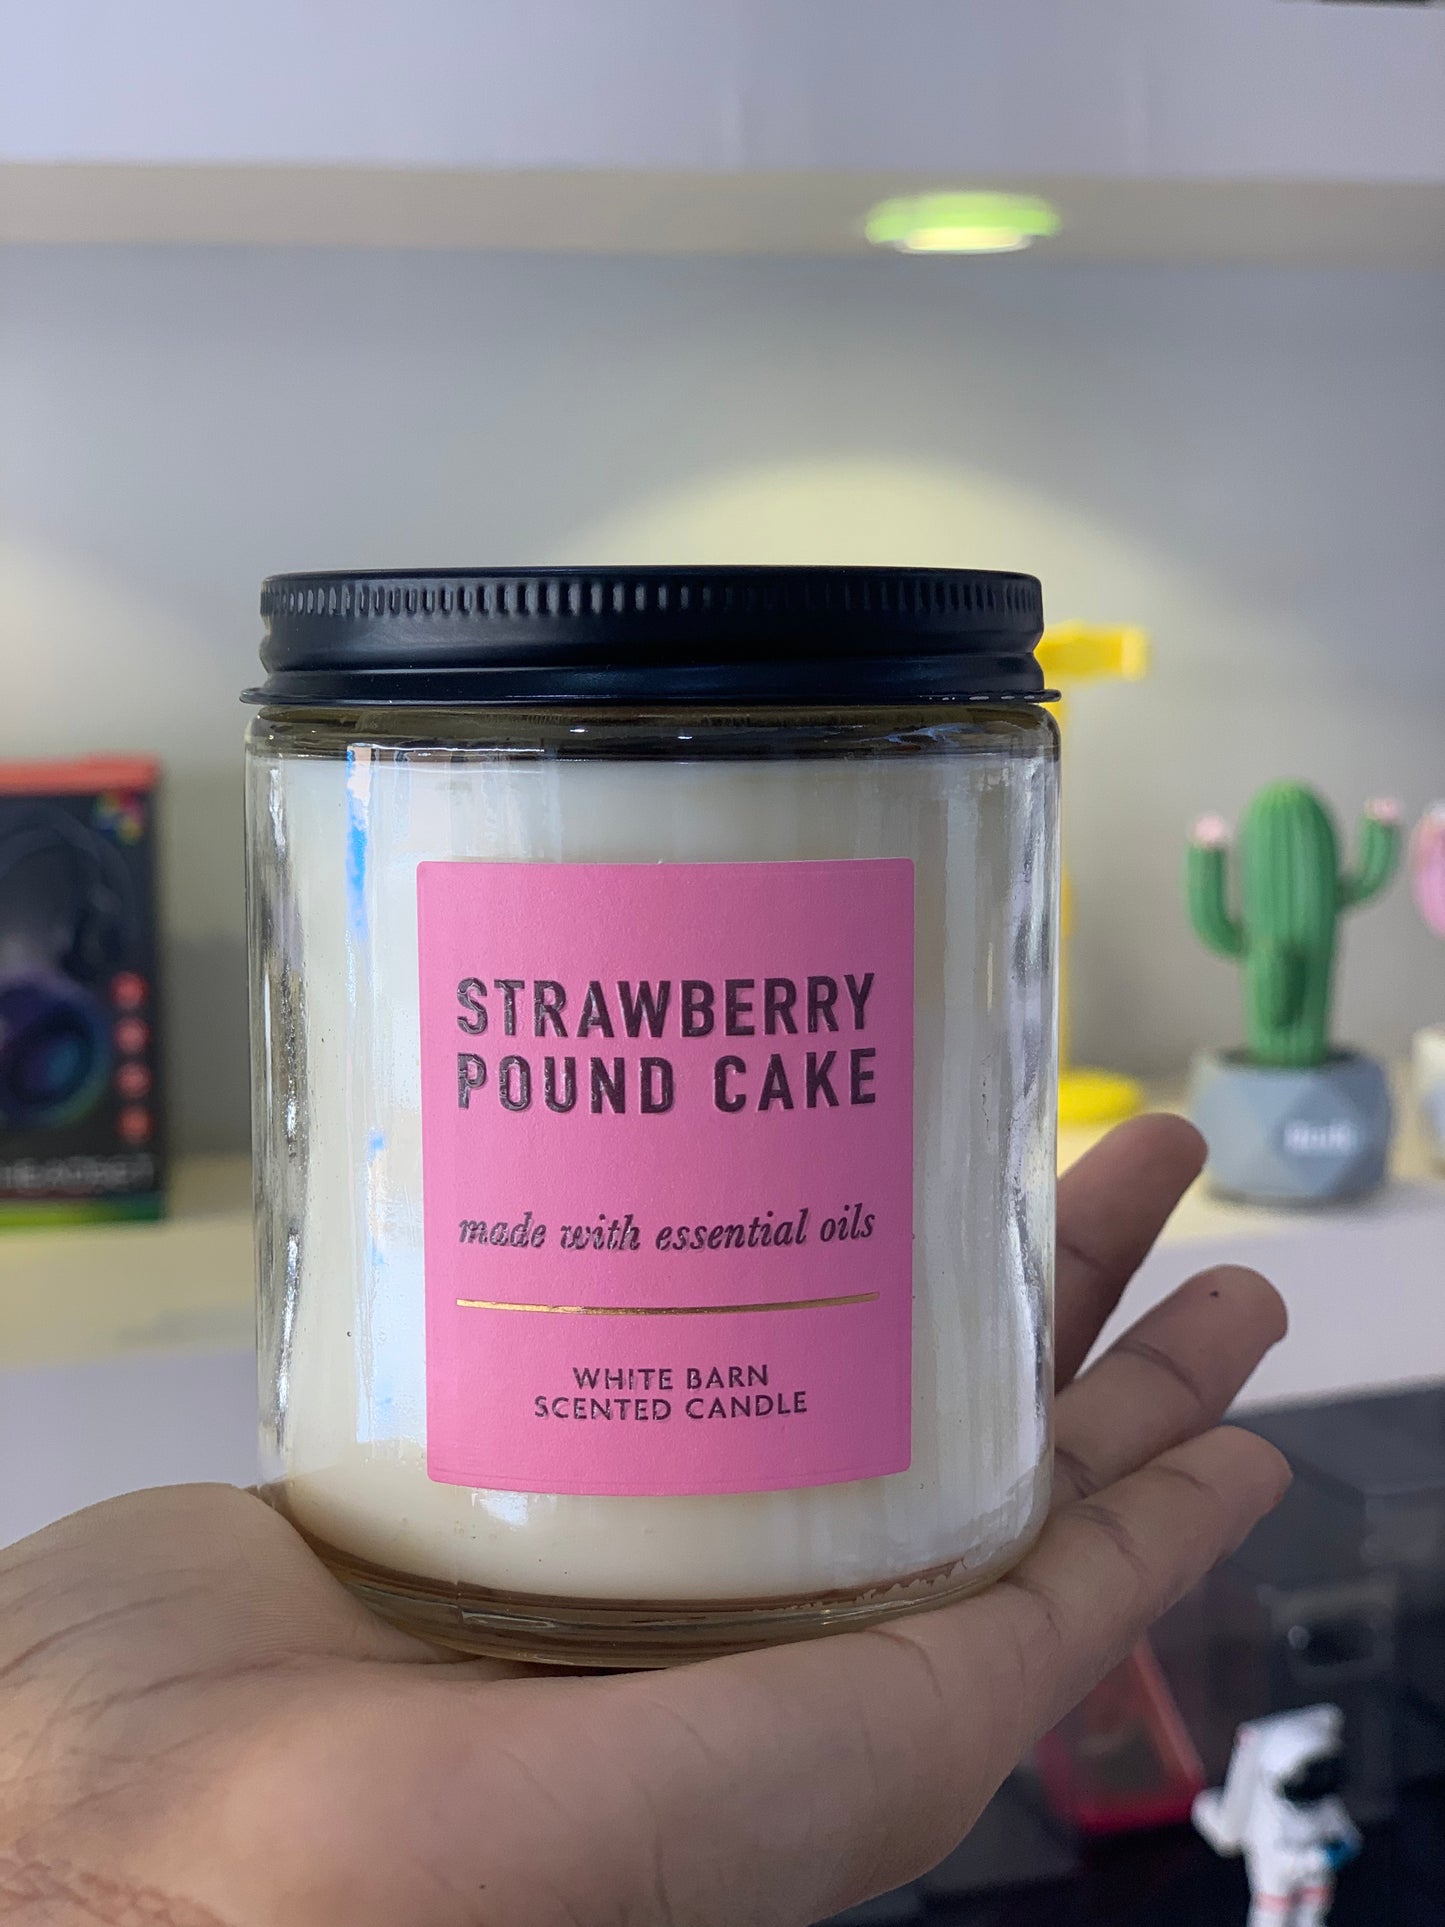 Strawberry Pond Cake Scented Candle